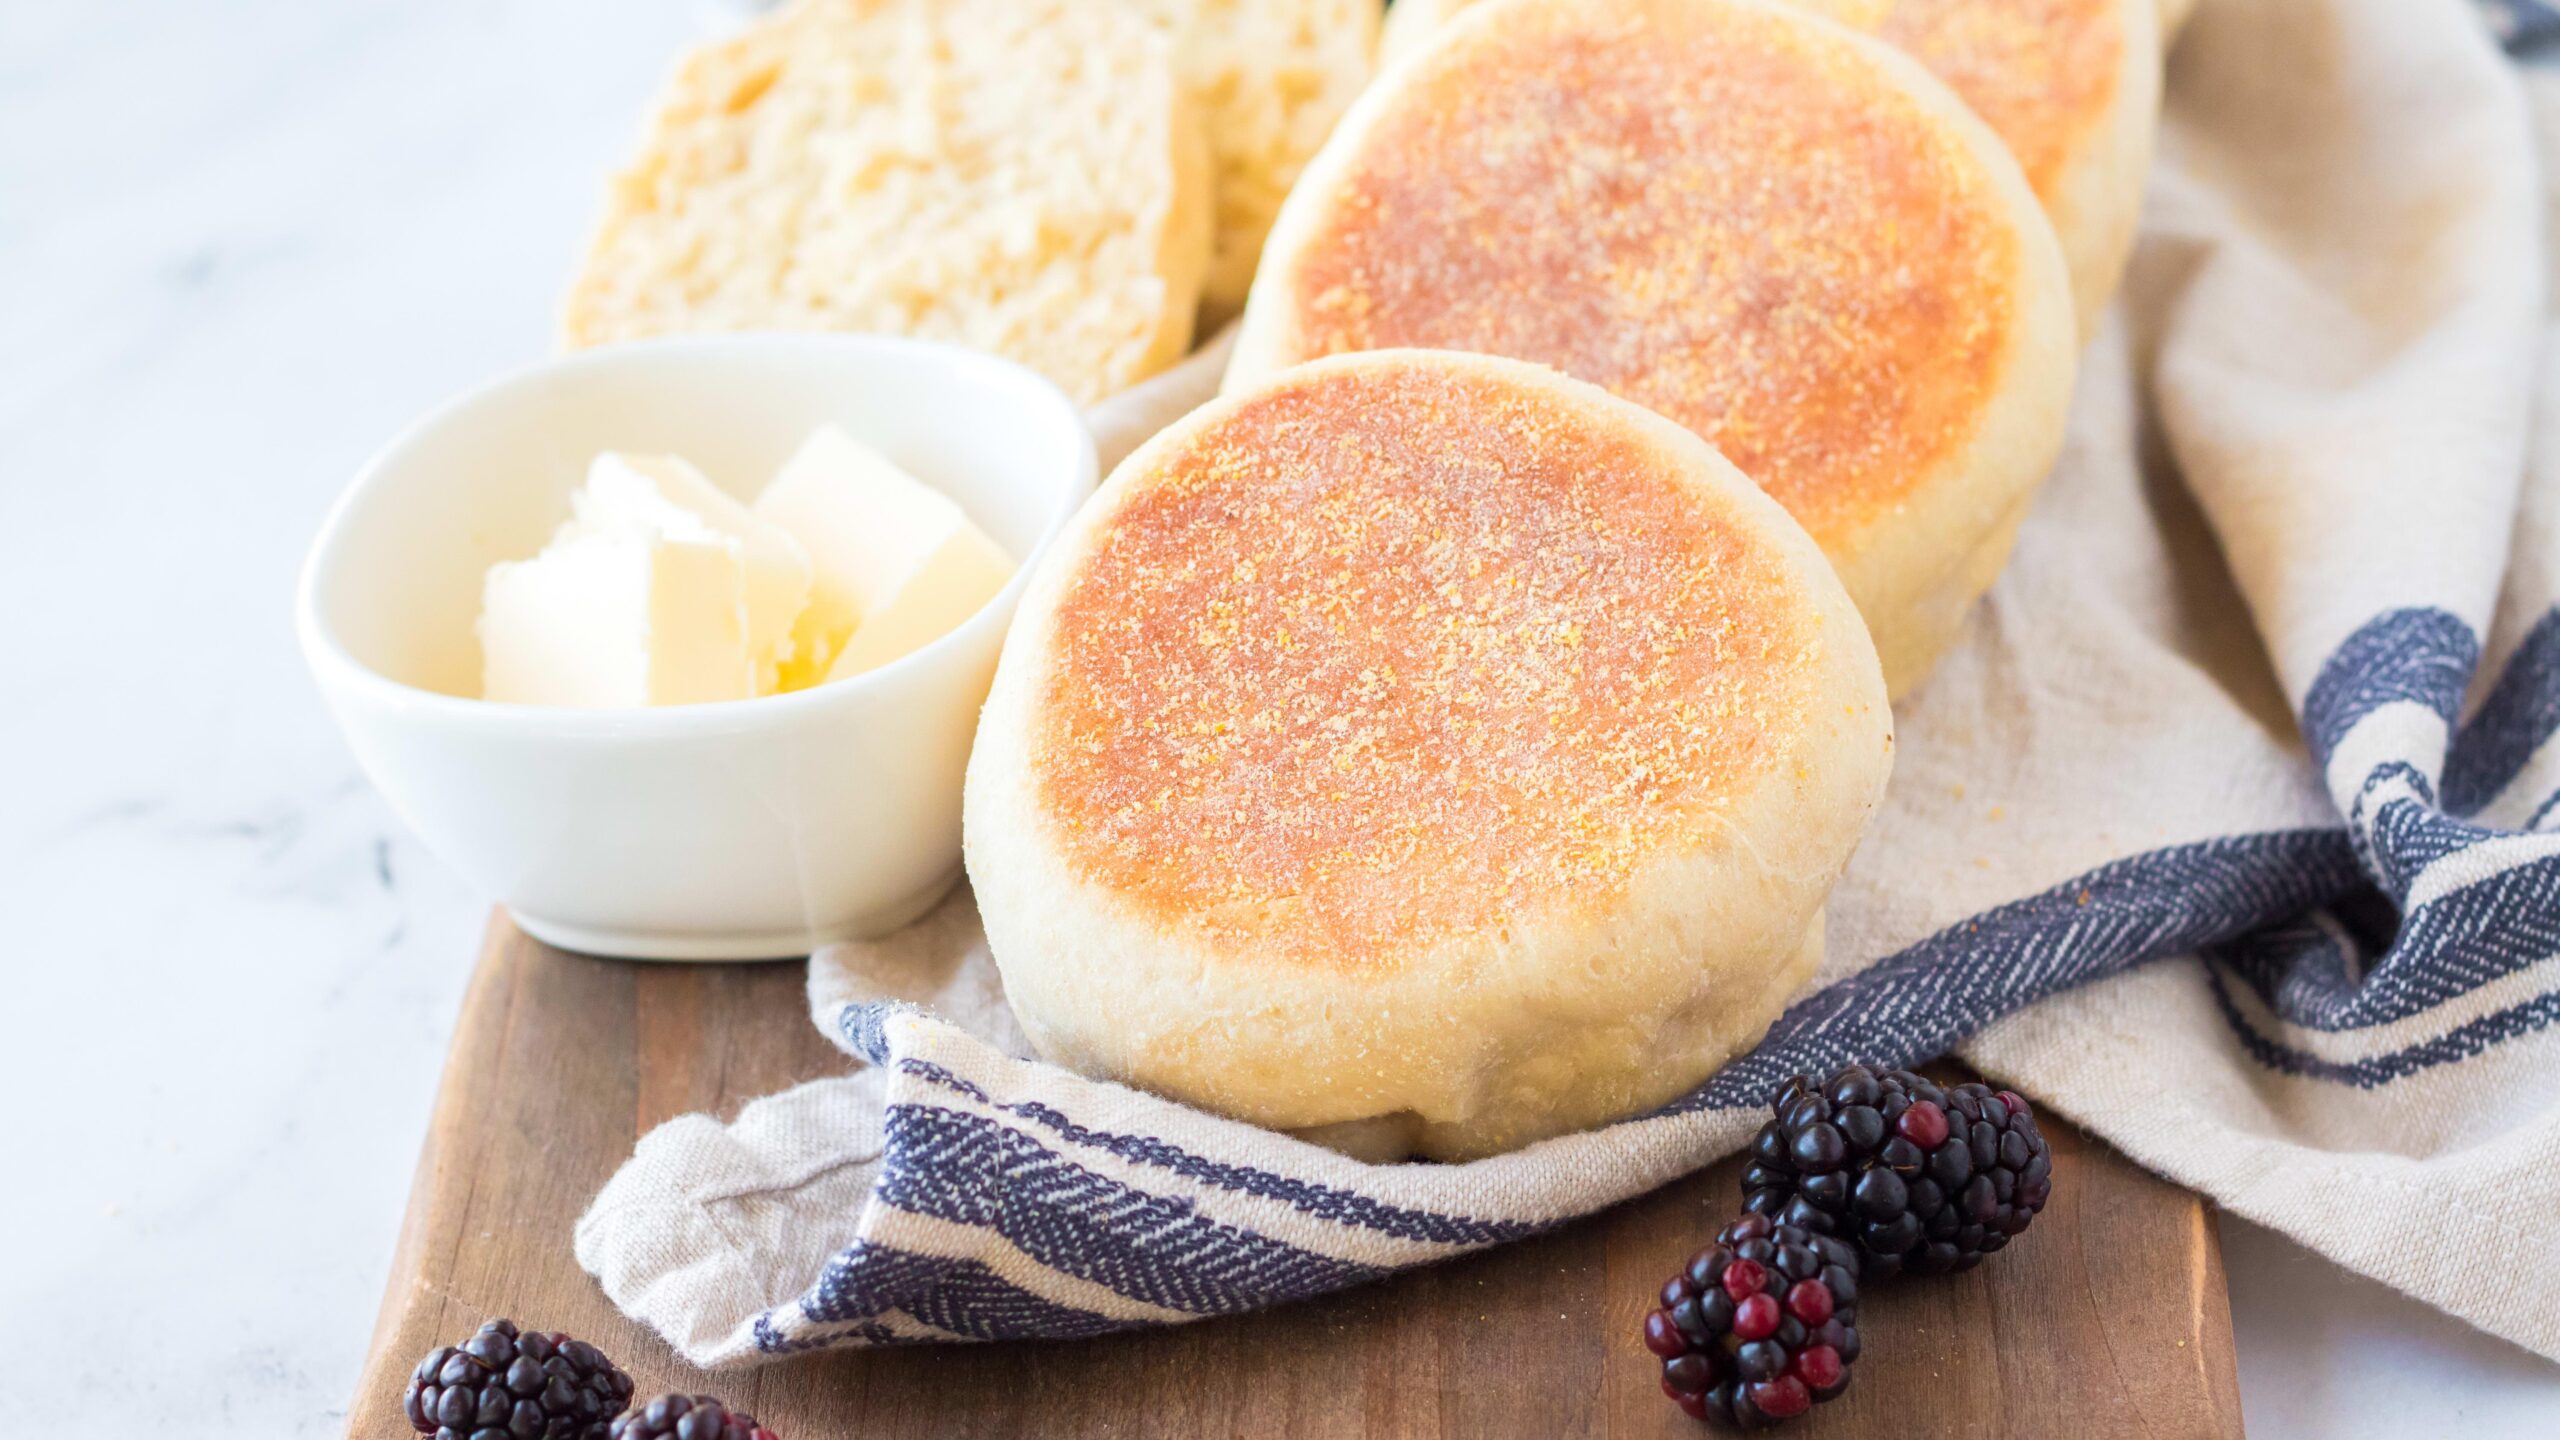  As soon as you taste your first homemade English muffin, you'll never want to go back to the store-bought kind